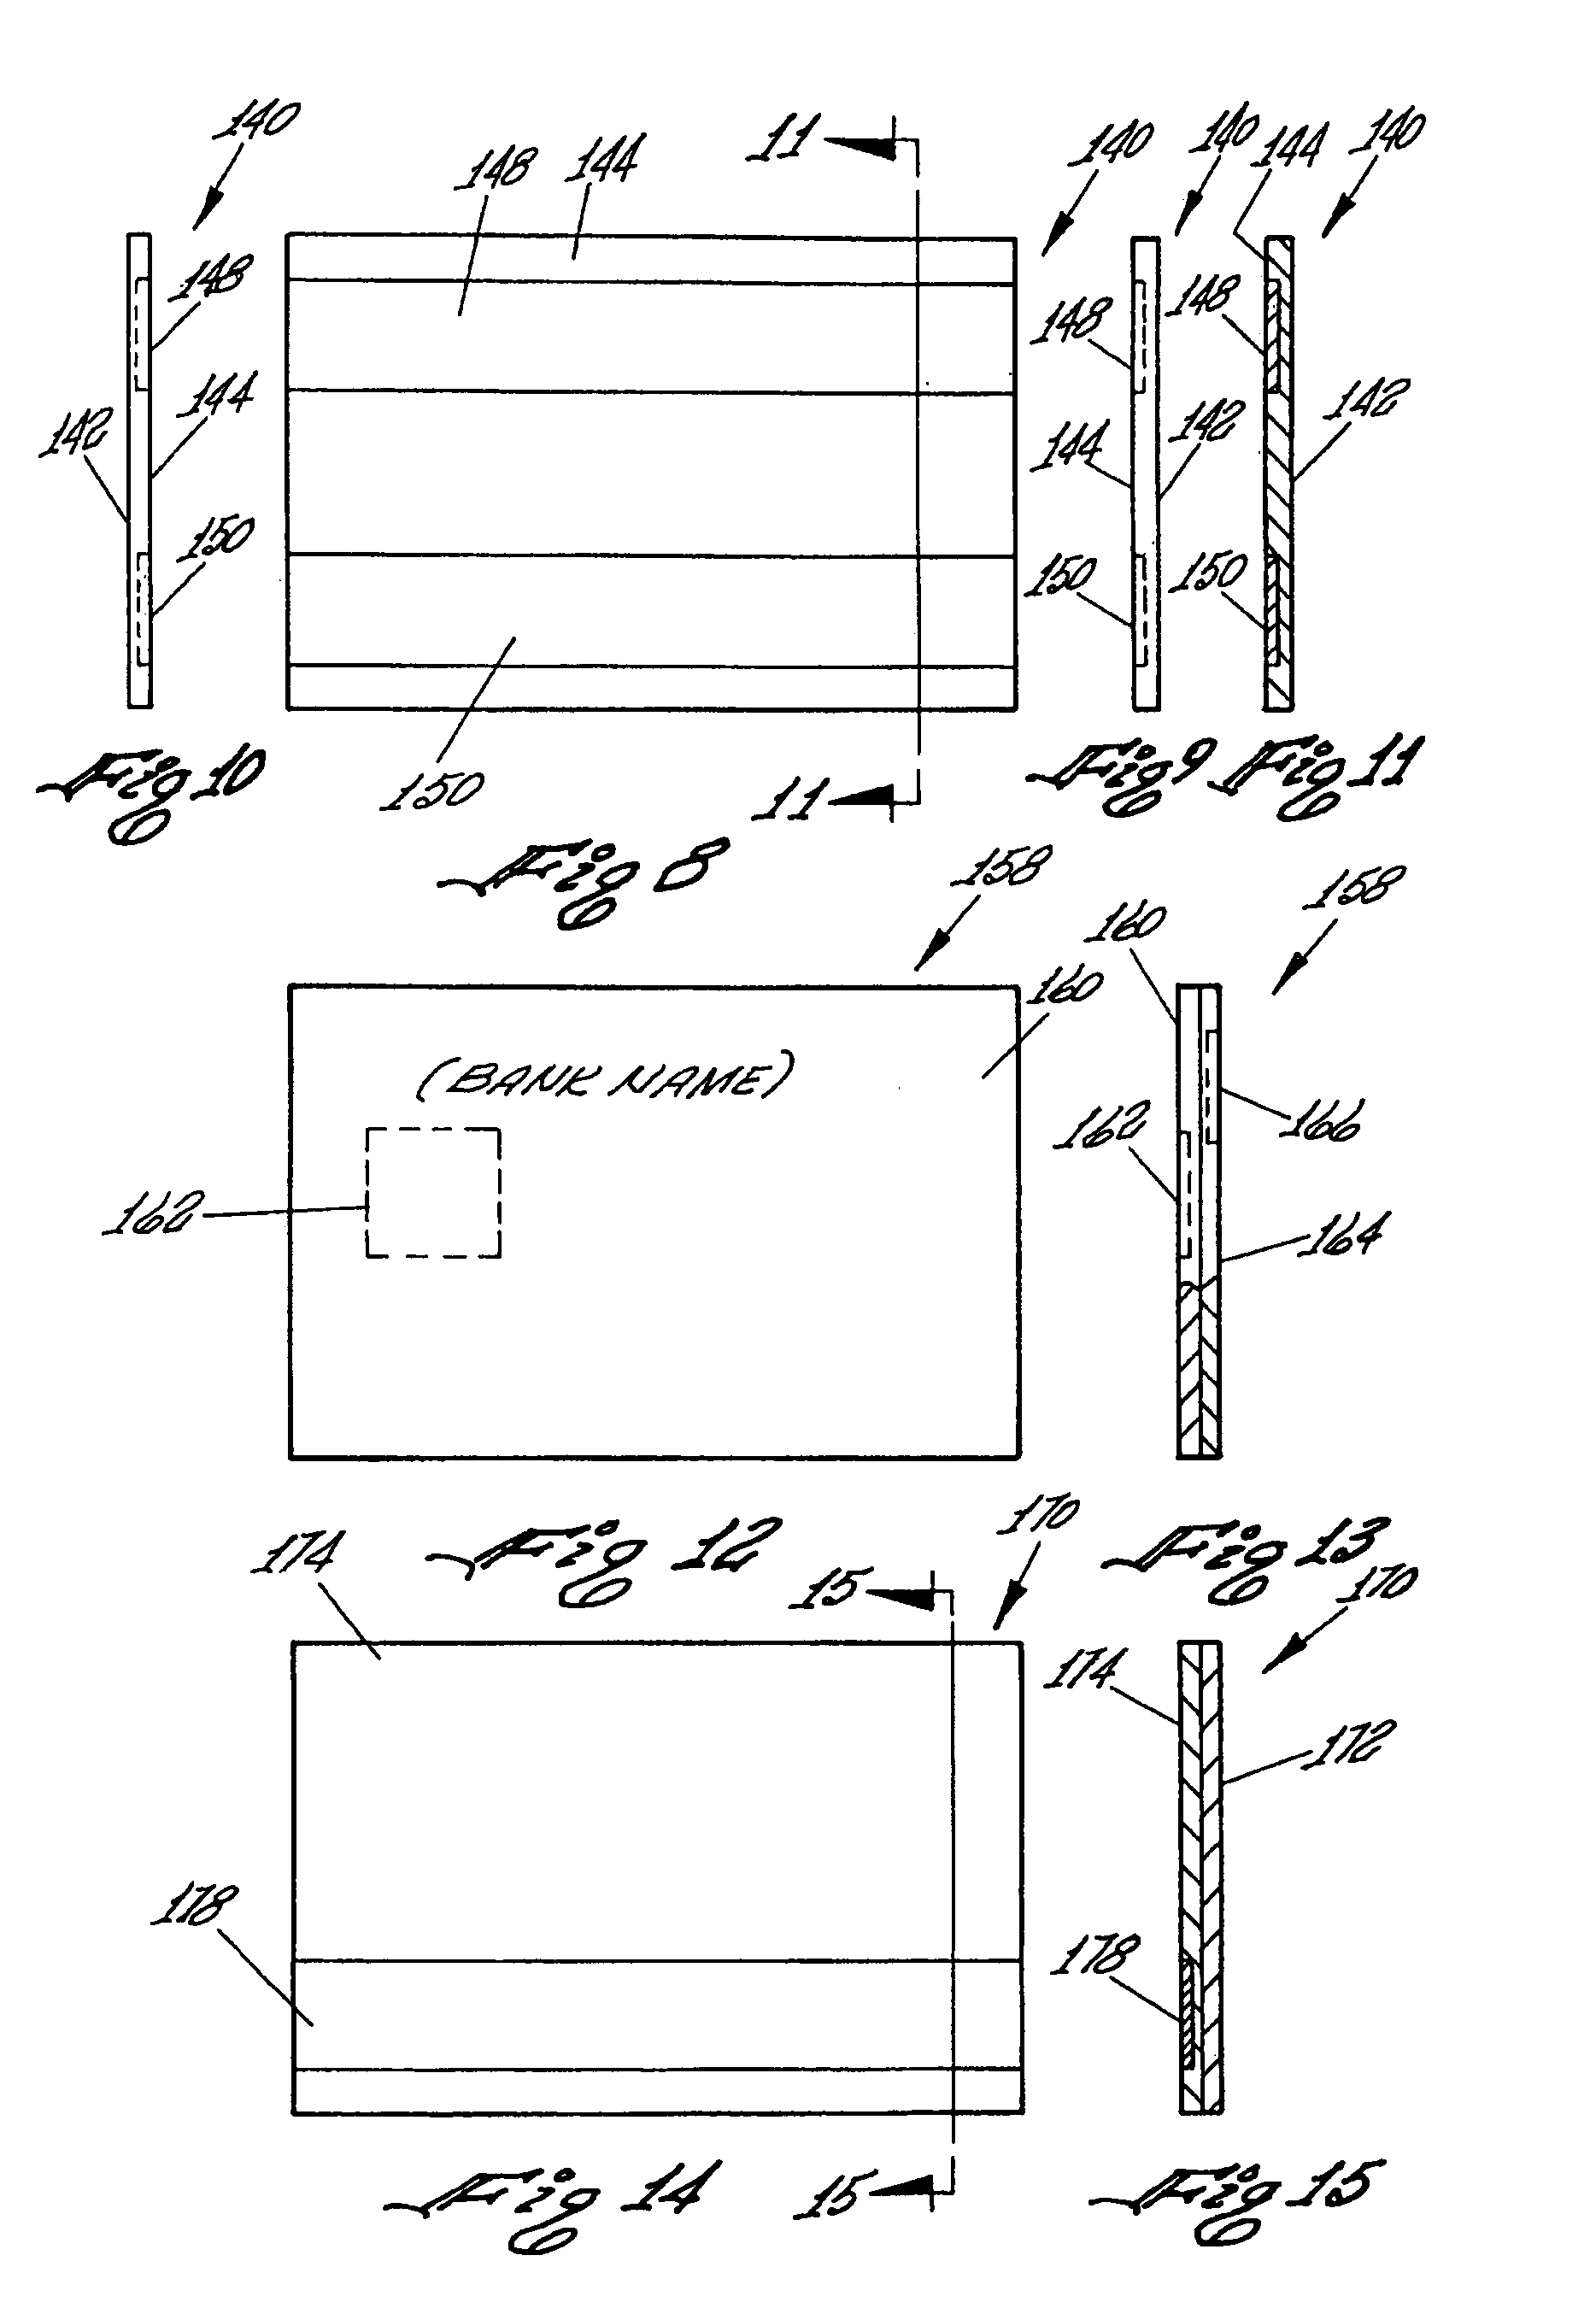 Data storage device apparatus and method for using same